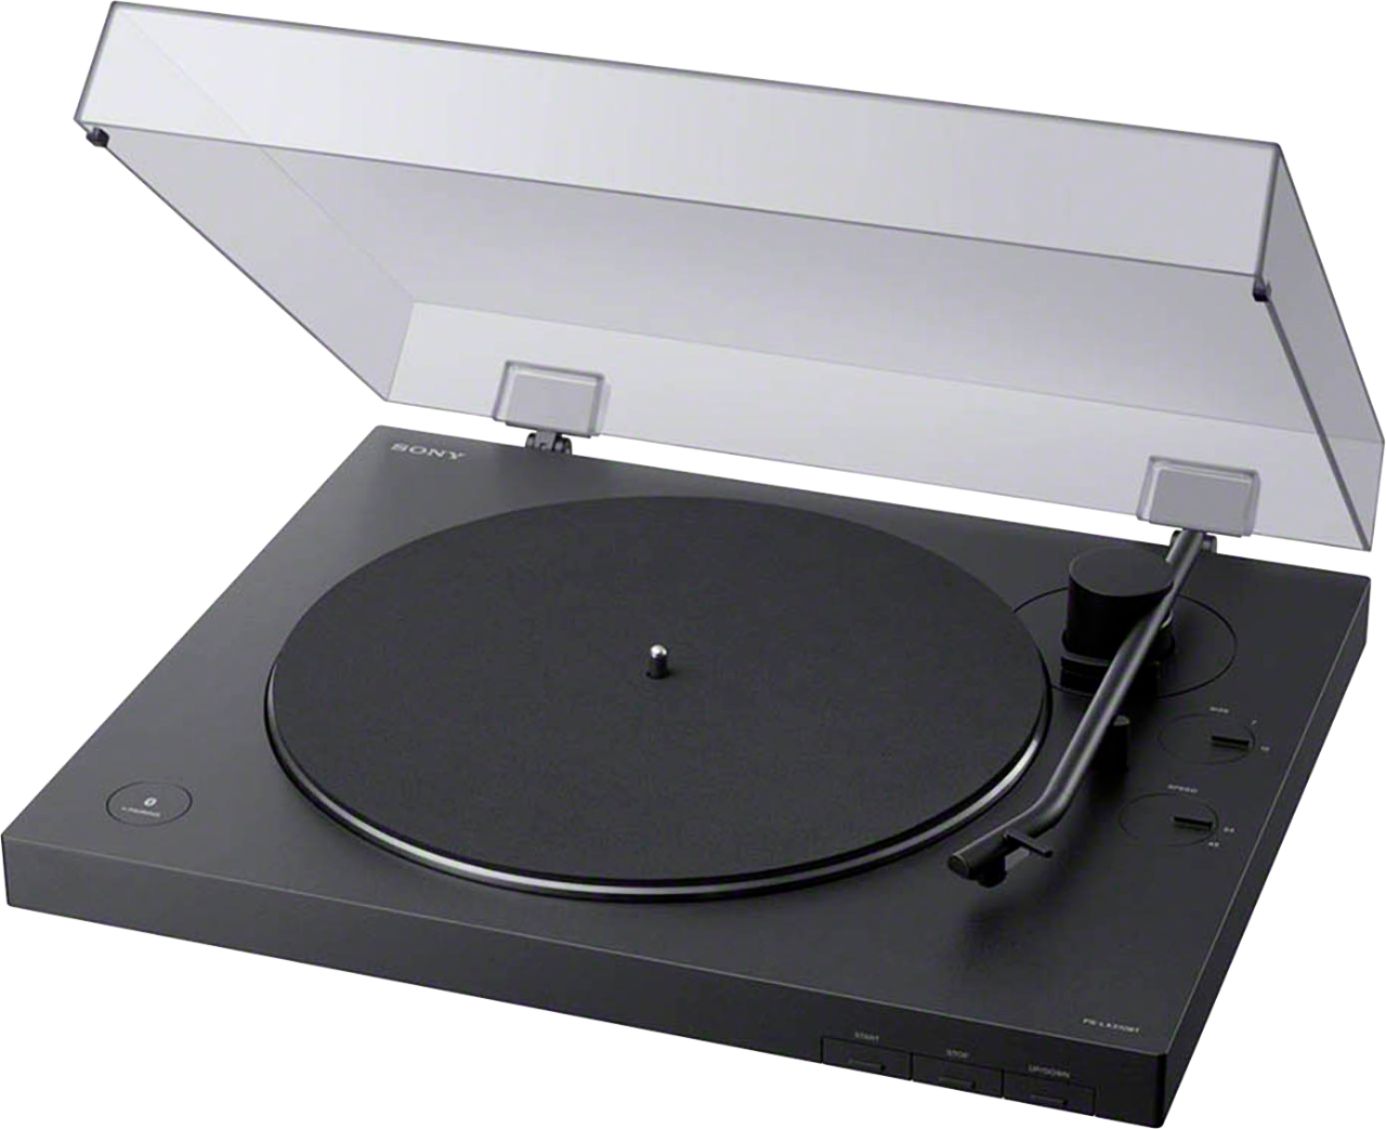 (Open-Box Excellent) Sony PS-LX310BT Turntable with Bluetooth and USB $141.99 + Free Shipping @ Best Buy